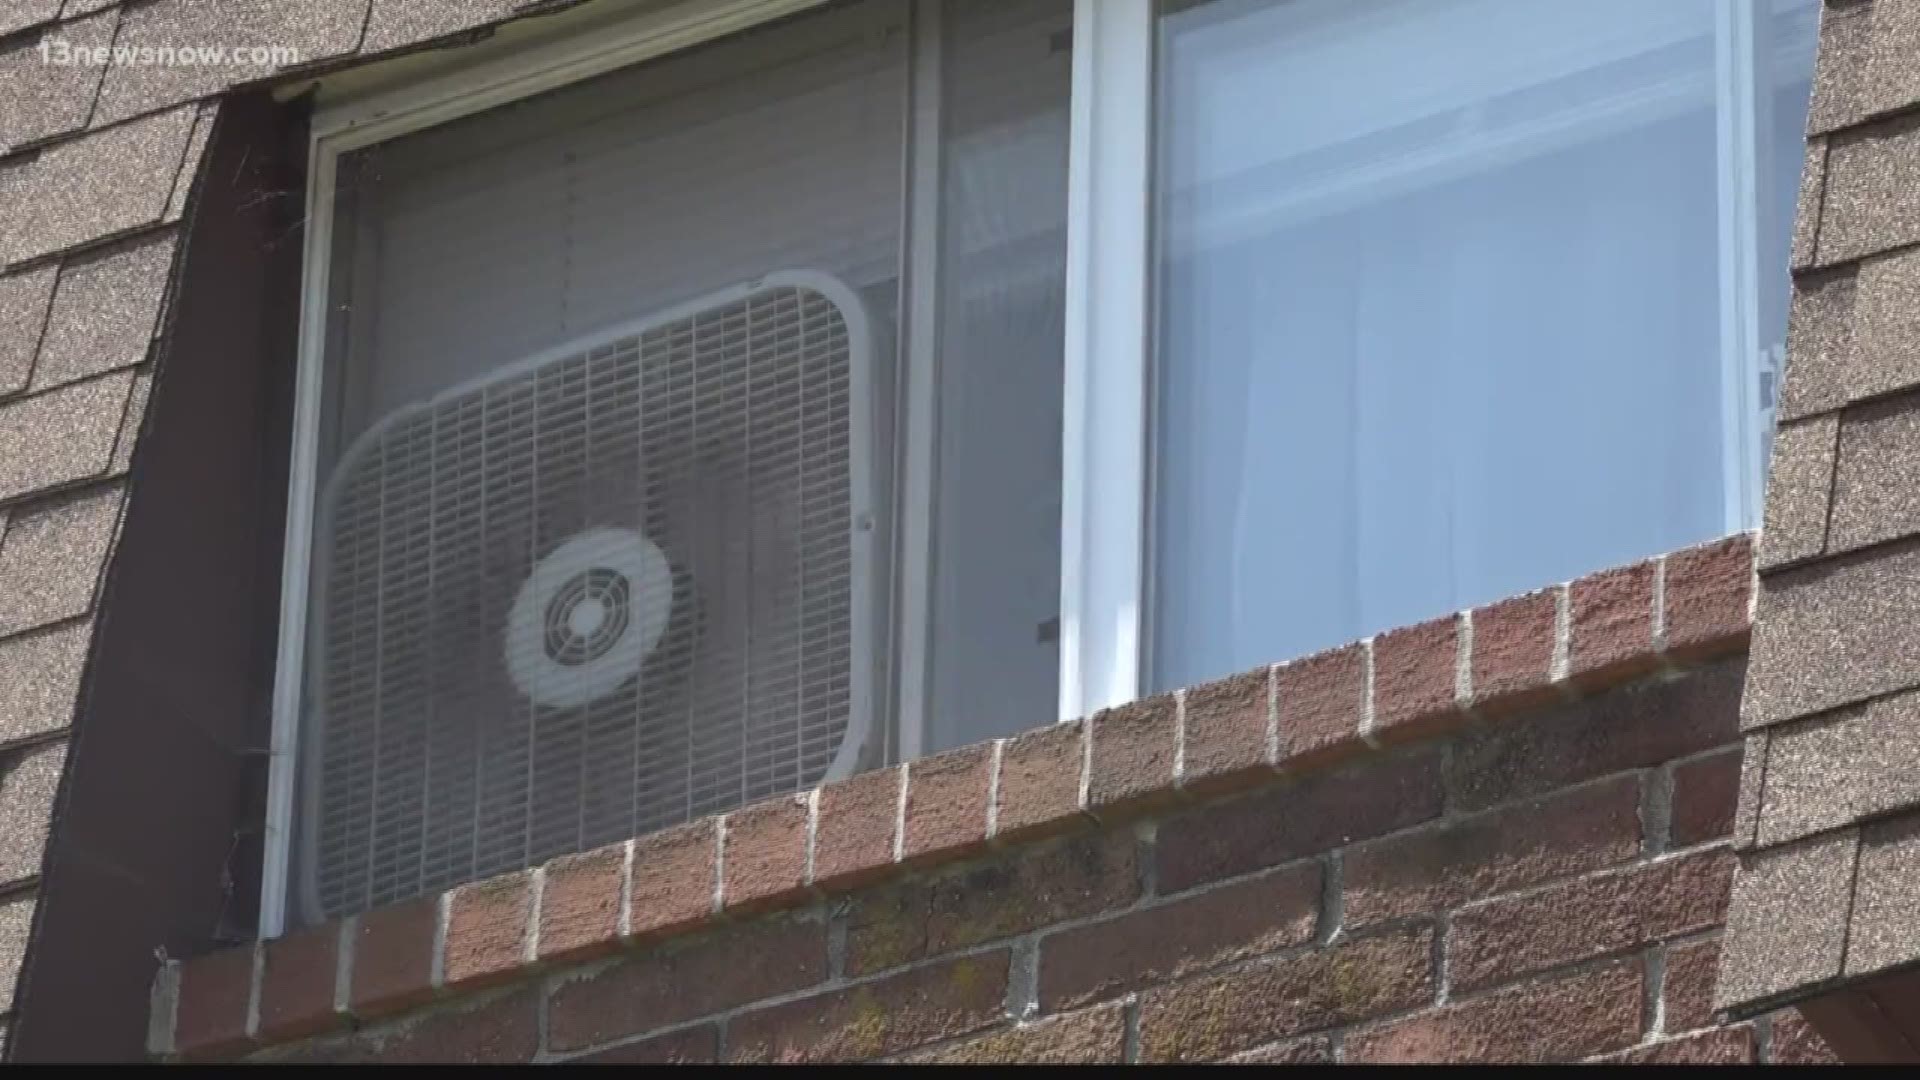 In this dangerous heat.An apartment complex in Newport News gets slapped with 74 code violations.